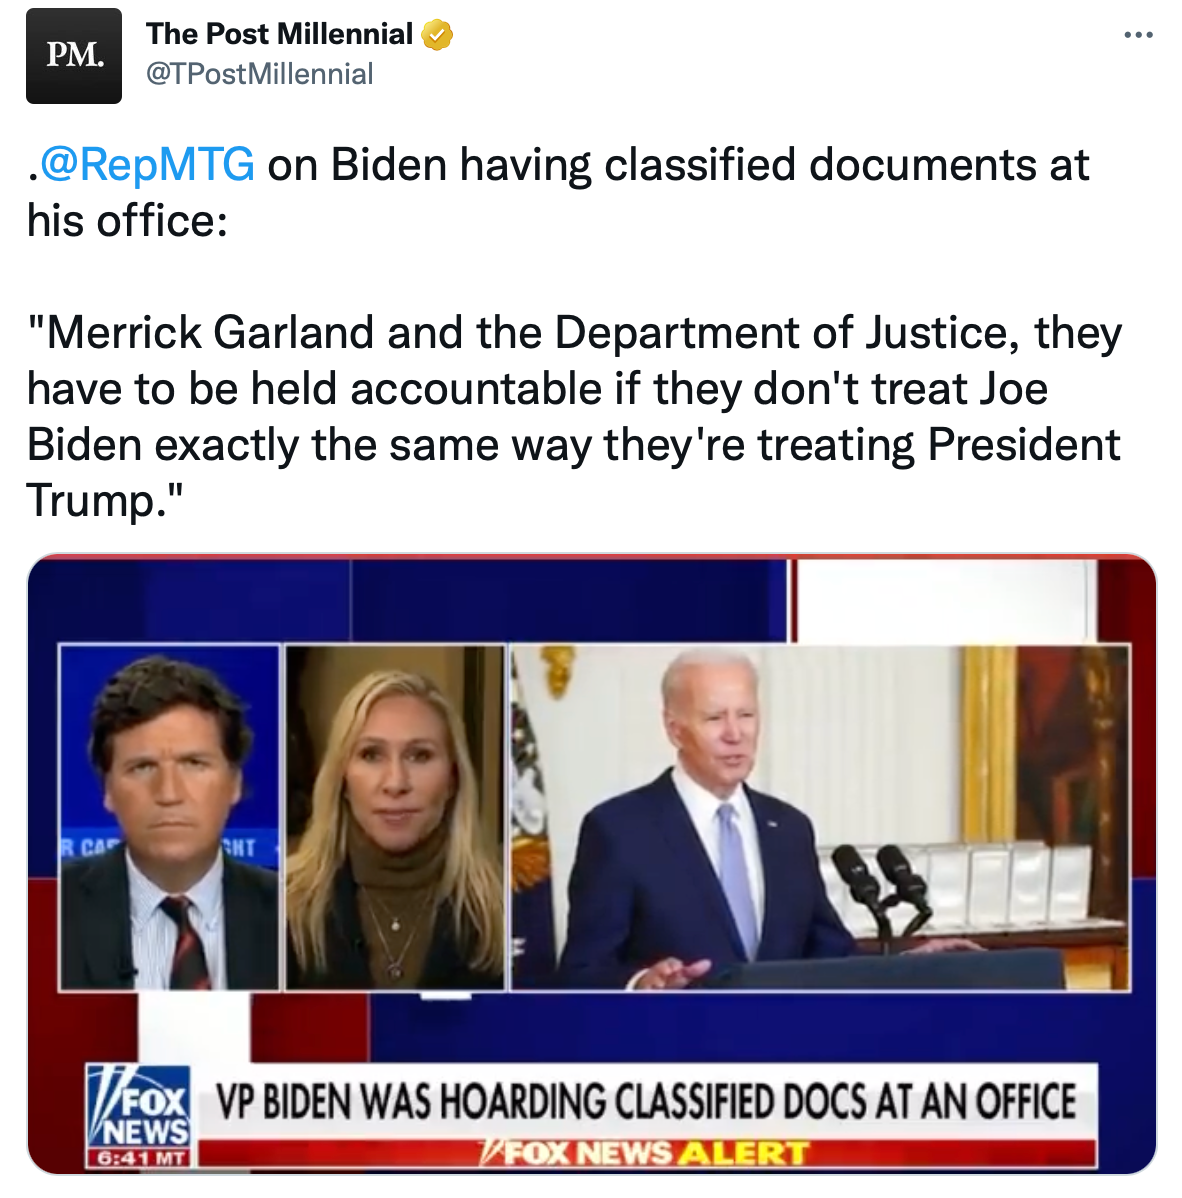 Rep. Greene interviews with Tucker Carlson about classified documents that were found in Biden's office